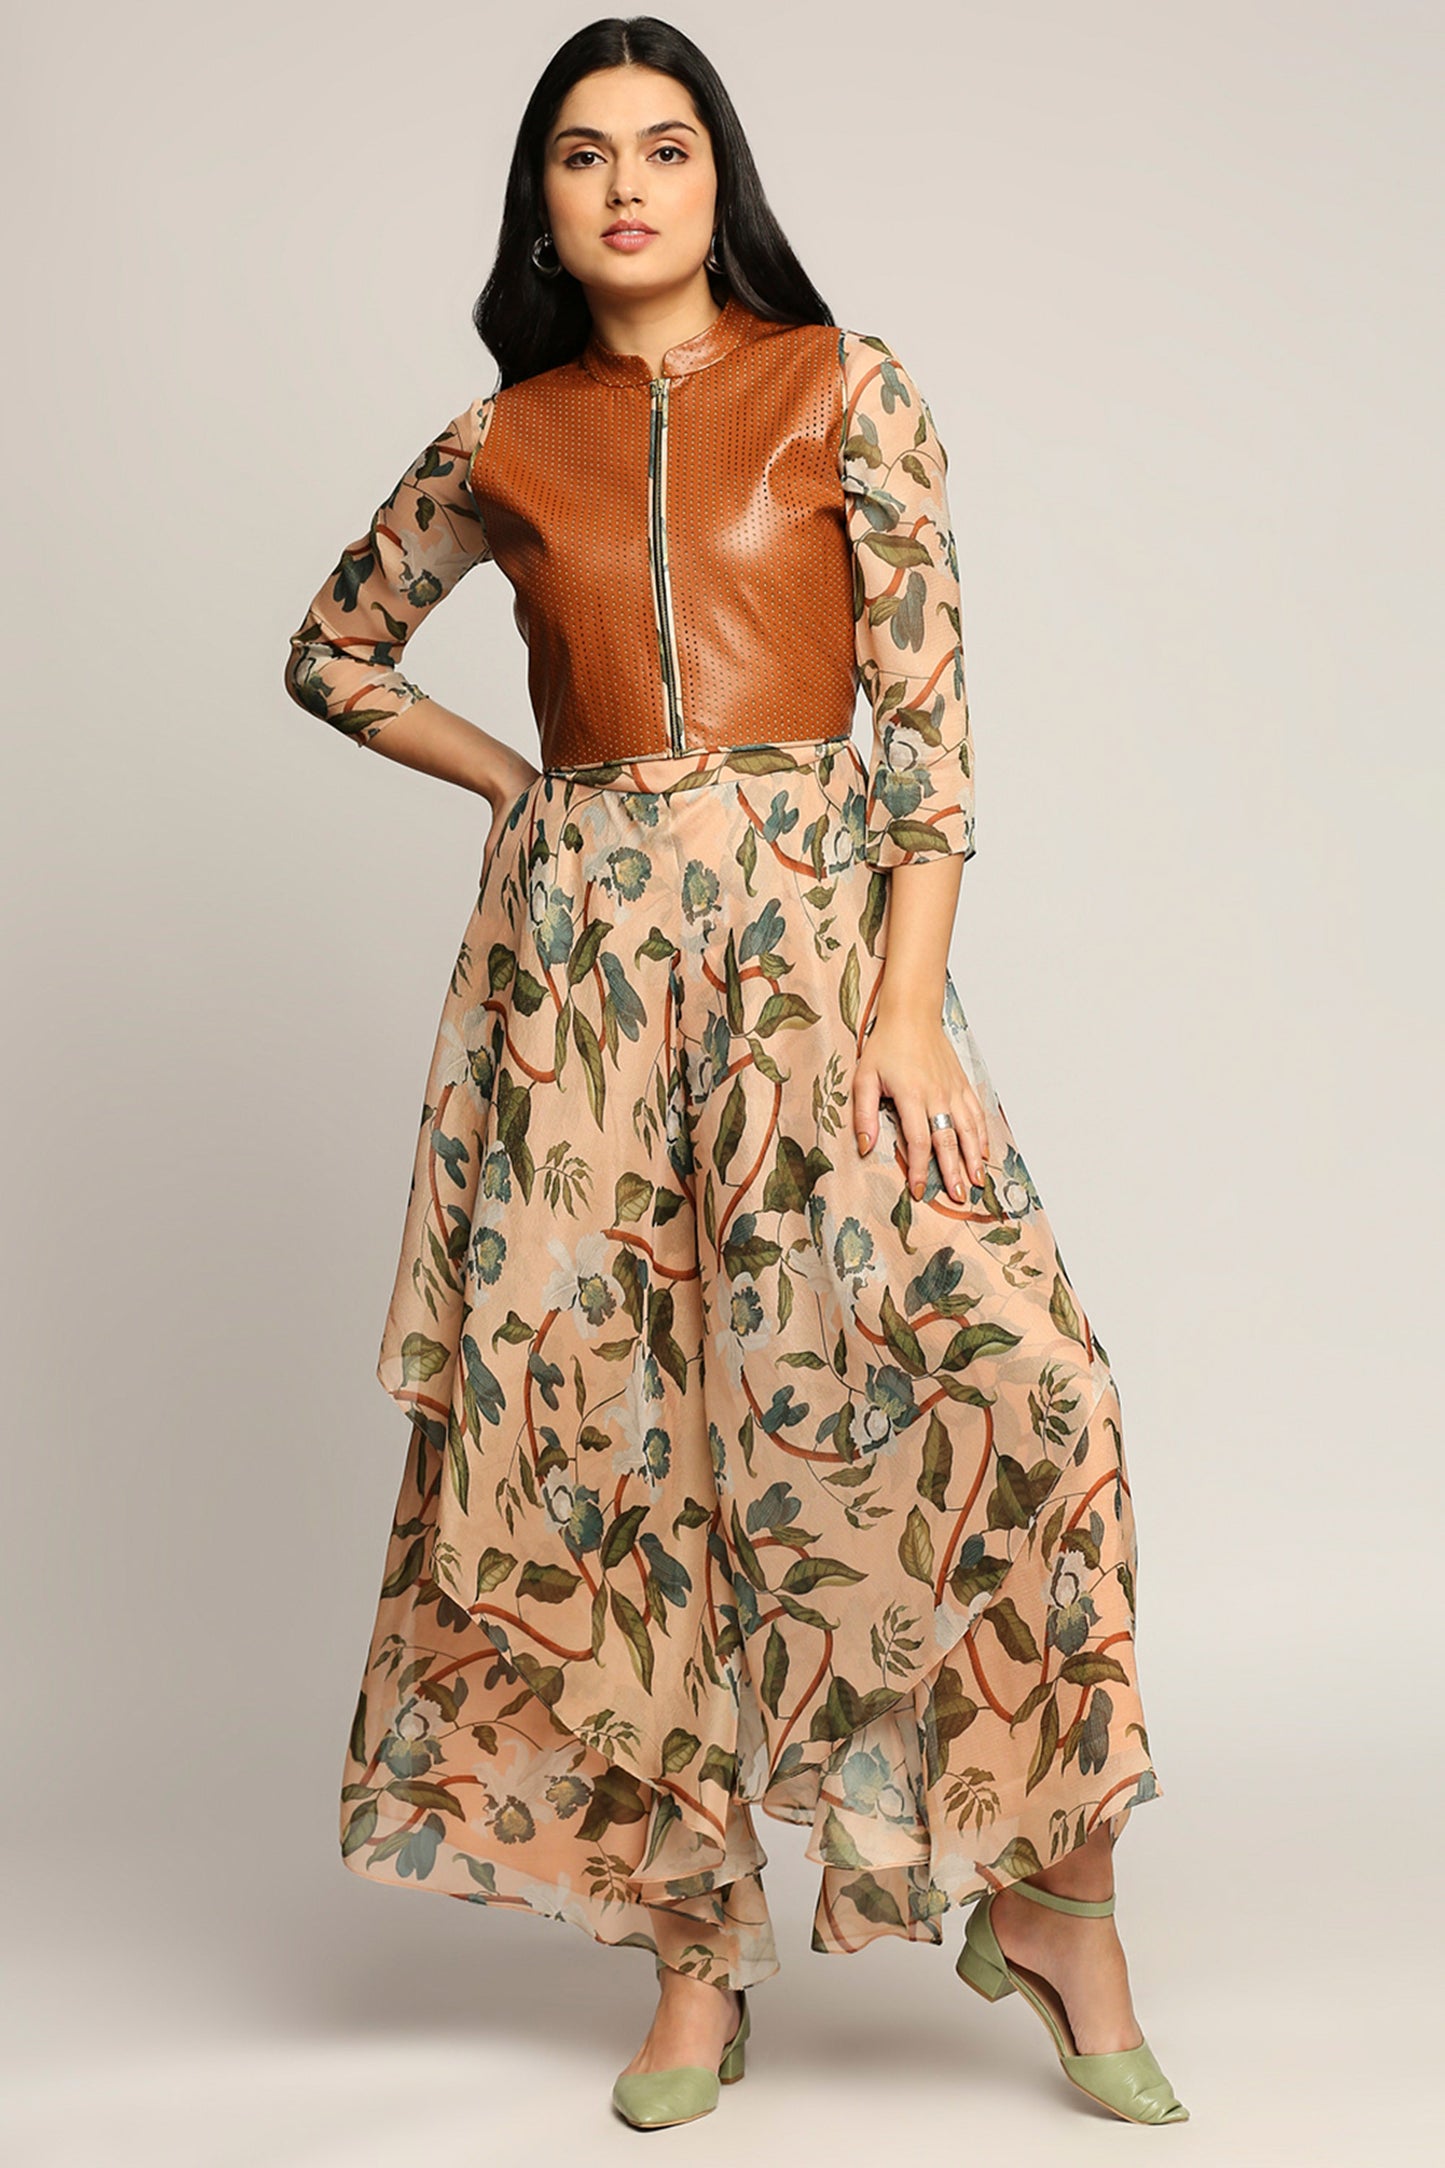 Orchid bloom printed jumpsuit with leather jacket